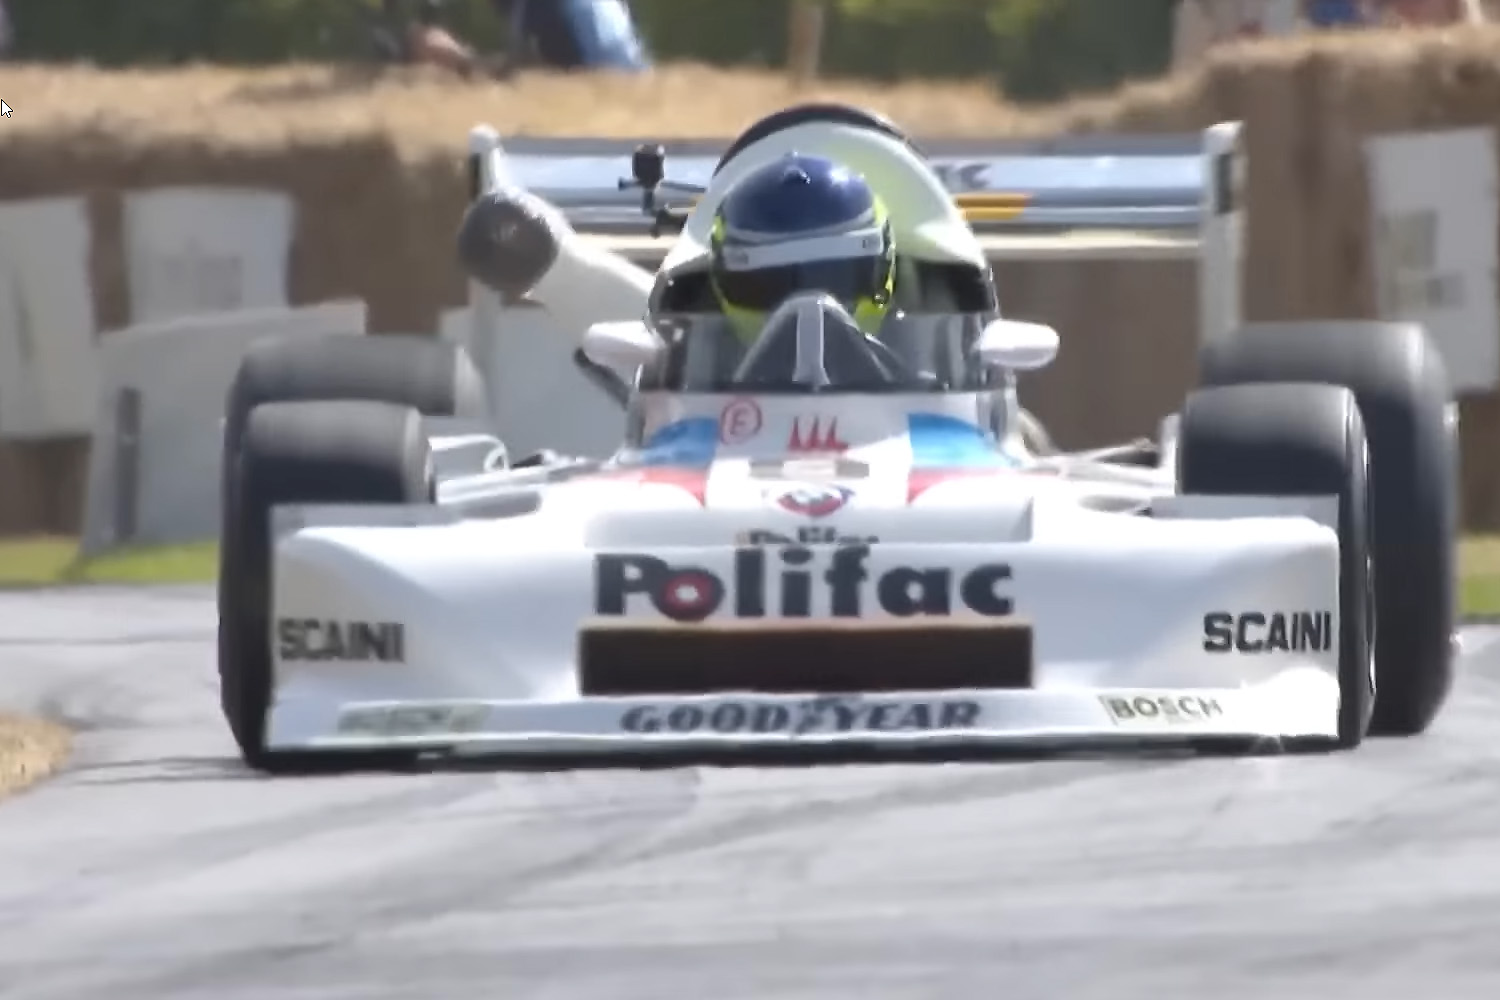 March 728 open wheel racer on track at Goodwood Festival of Speed